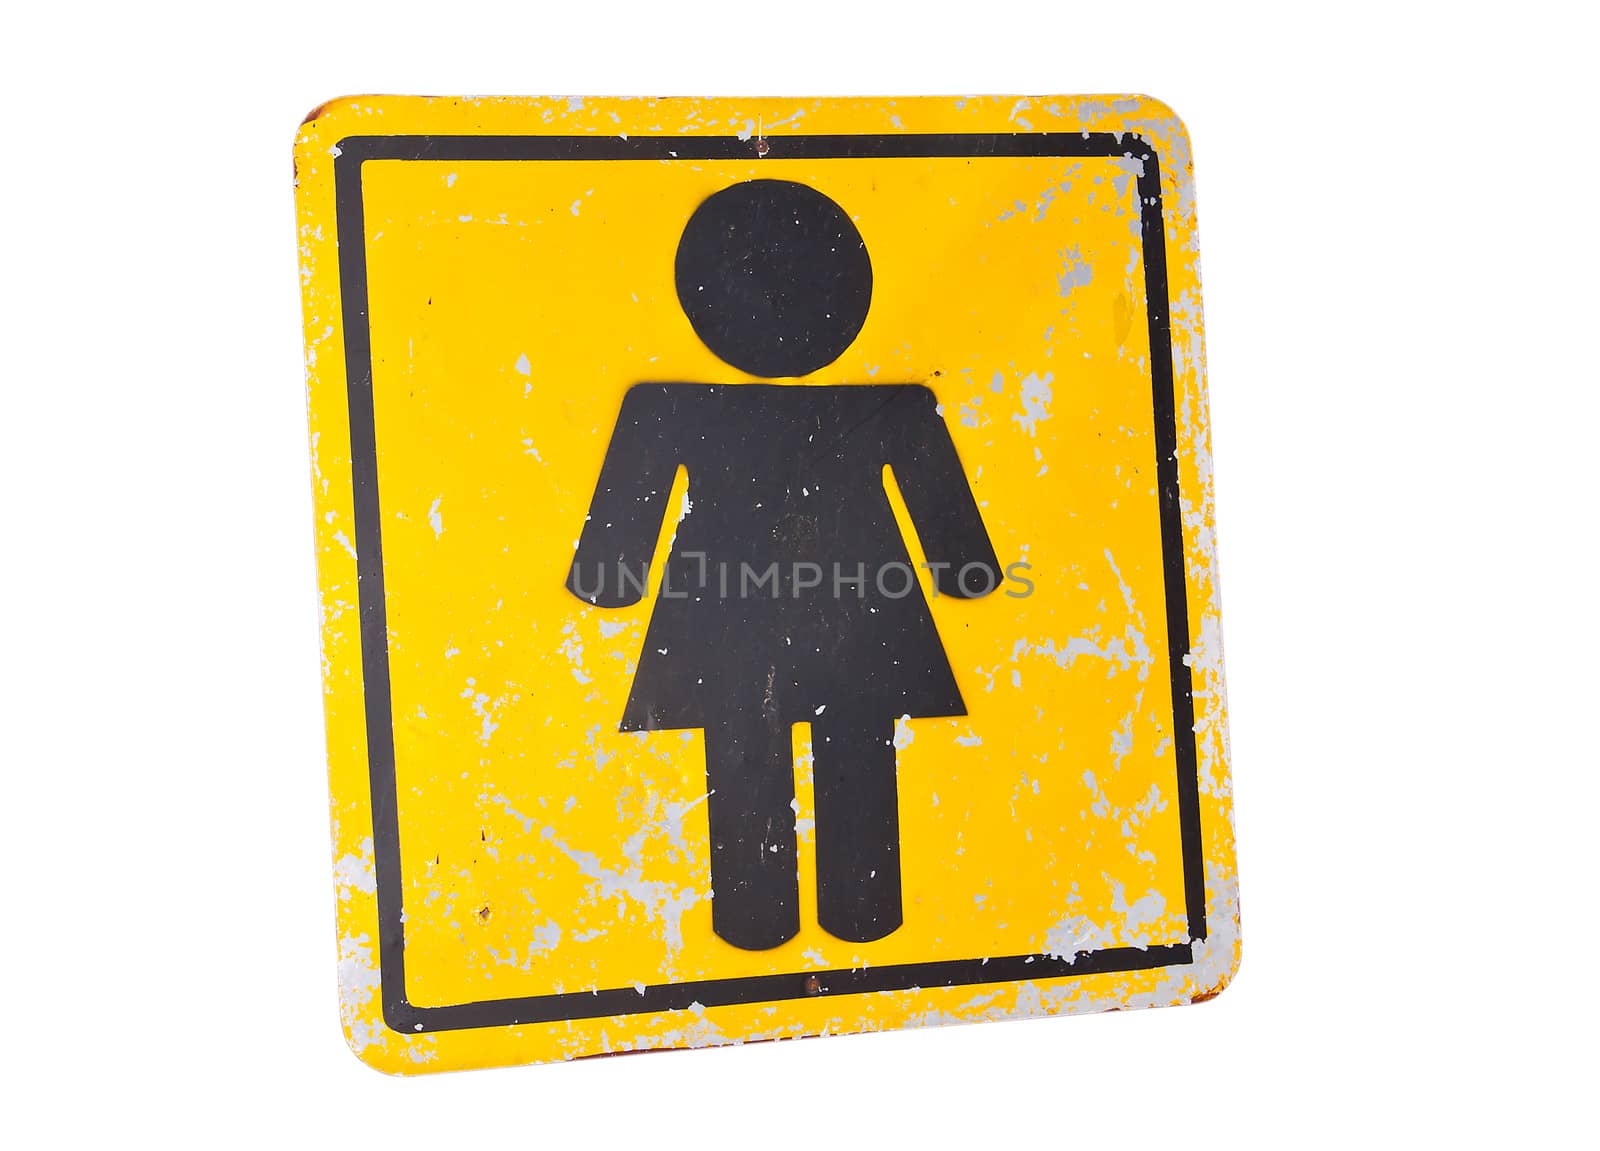 Women's room sign. by Theeraphon